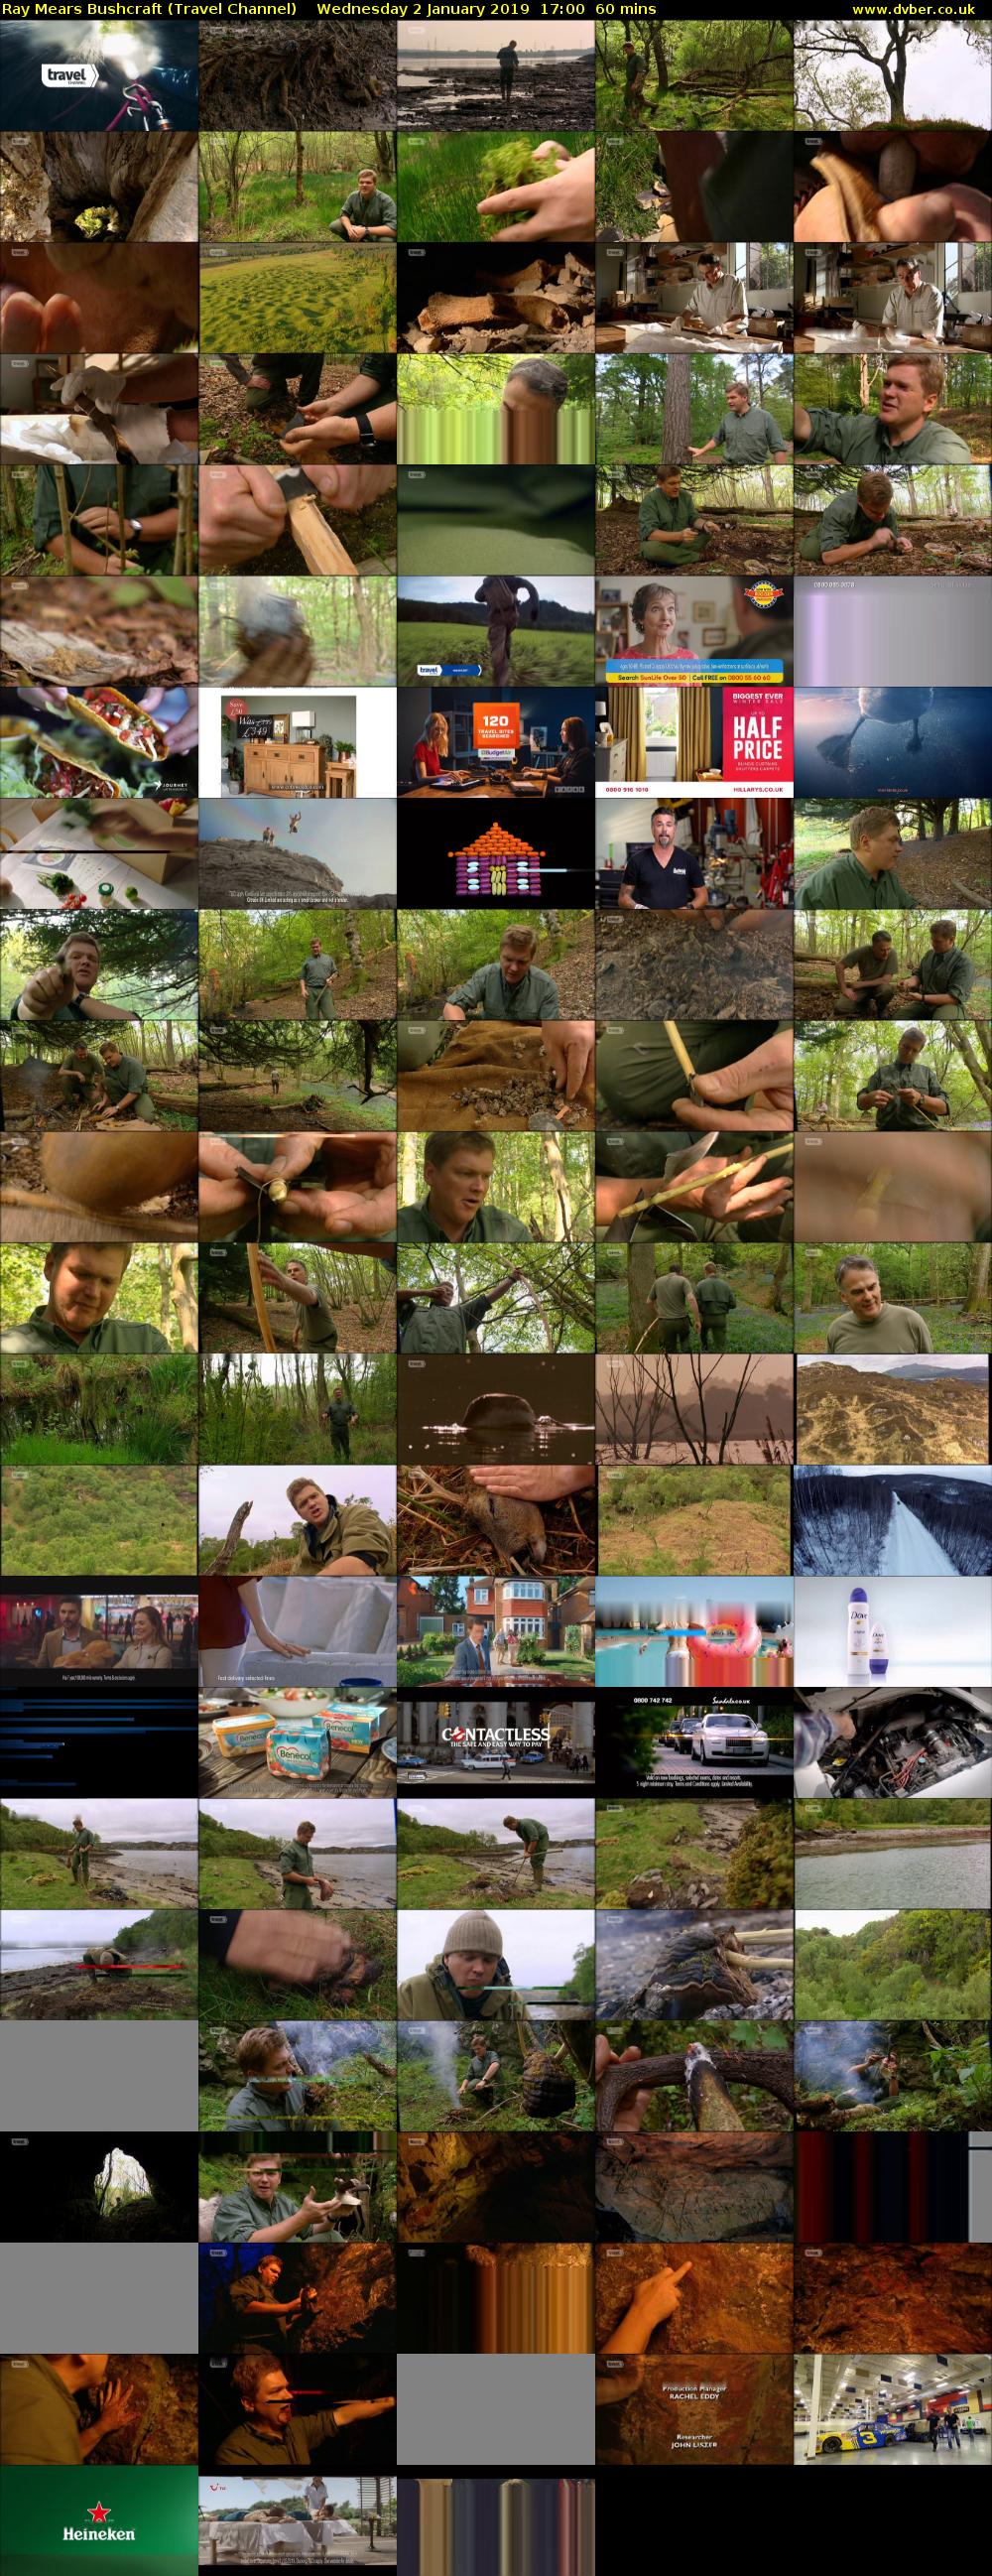 Ray Mears Bushcraft (Travel Channel) Wednesday 2 January 2019 17:00 - 18:00